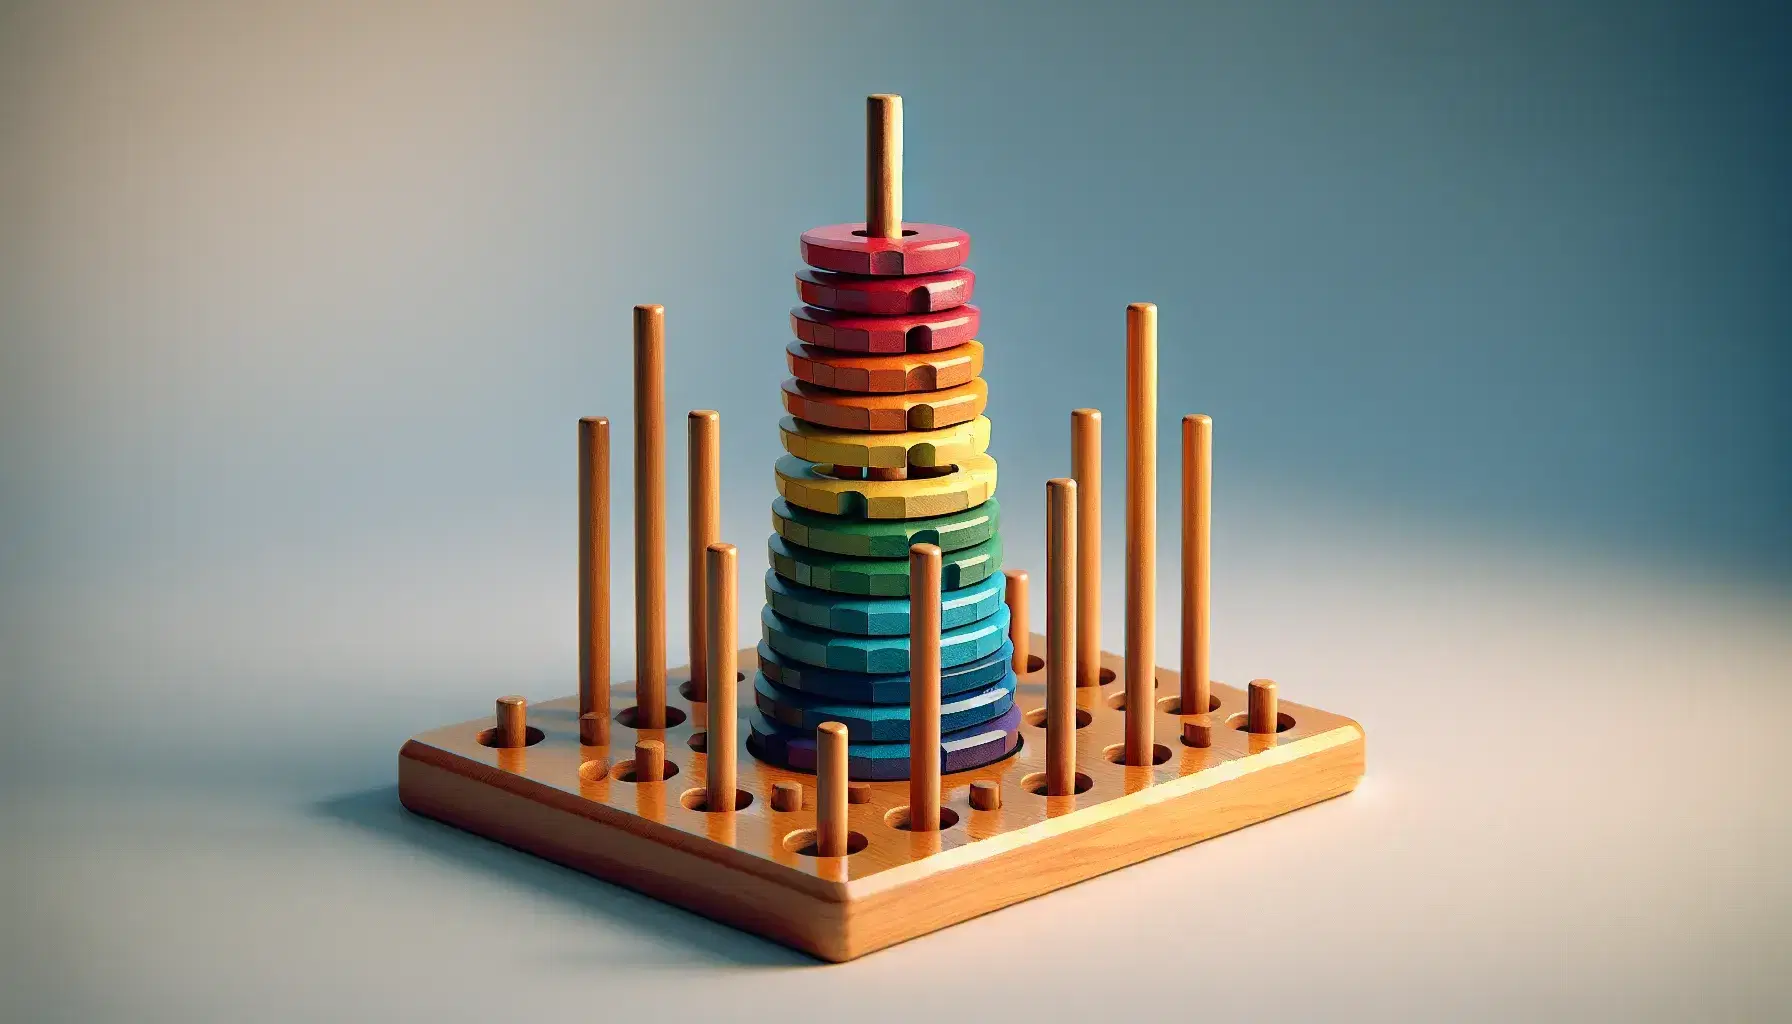 Tower of Hanoi with rainbow colored discs on wooden base, with three vertical rods and blue-cream gradient background.